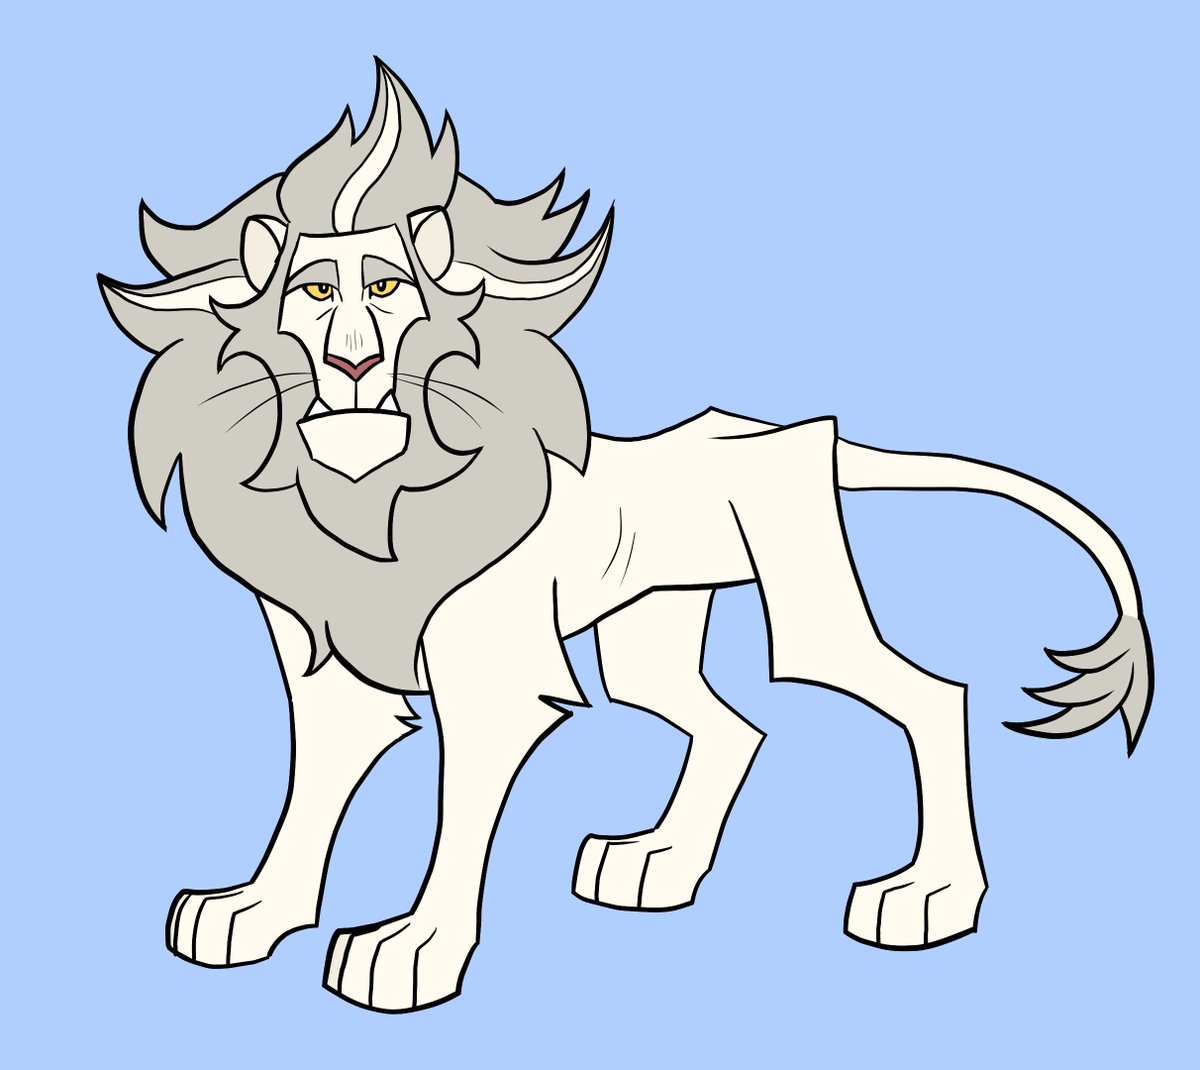 Leandro's lion form. He is literally a big scary cat. 